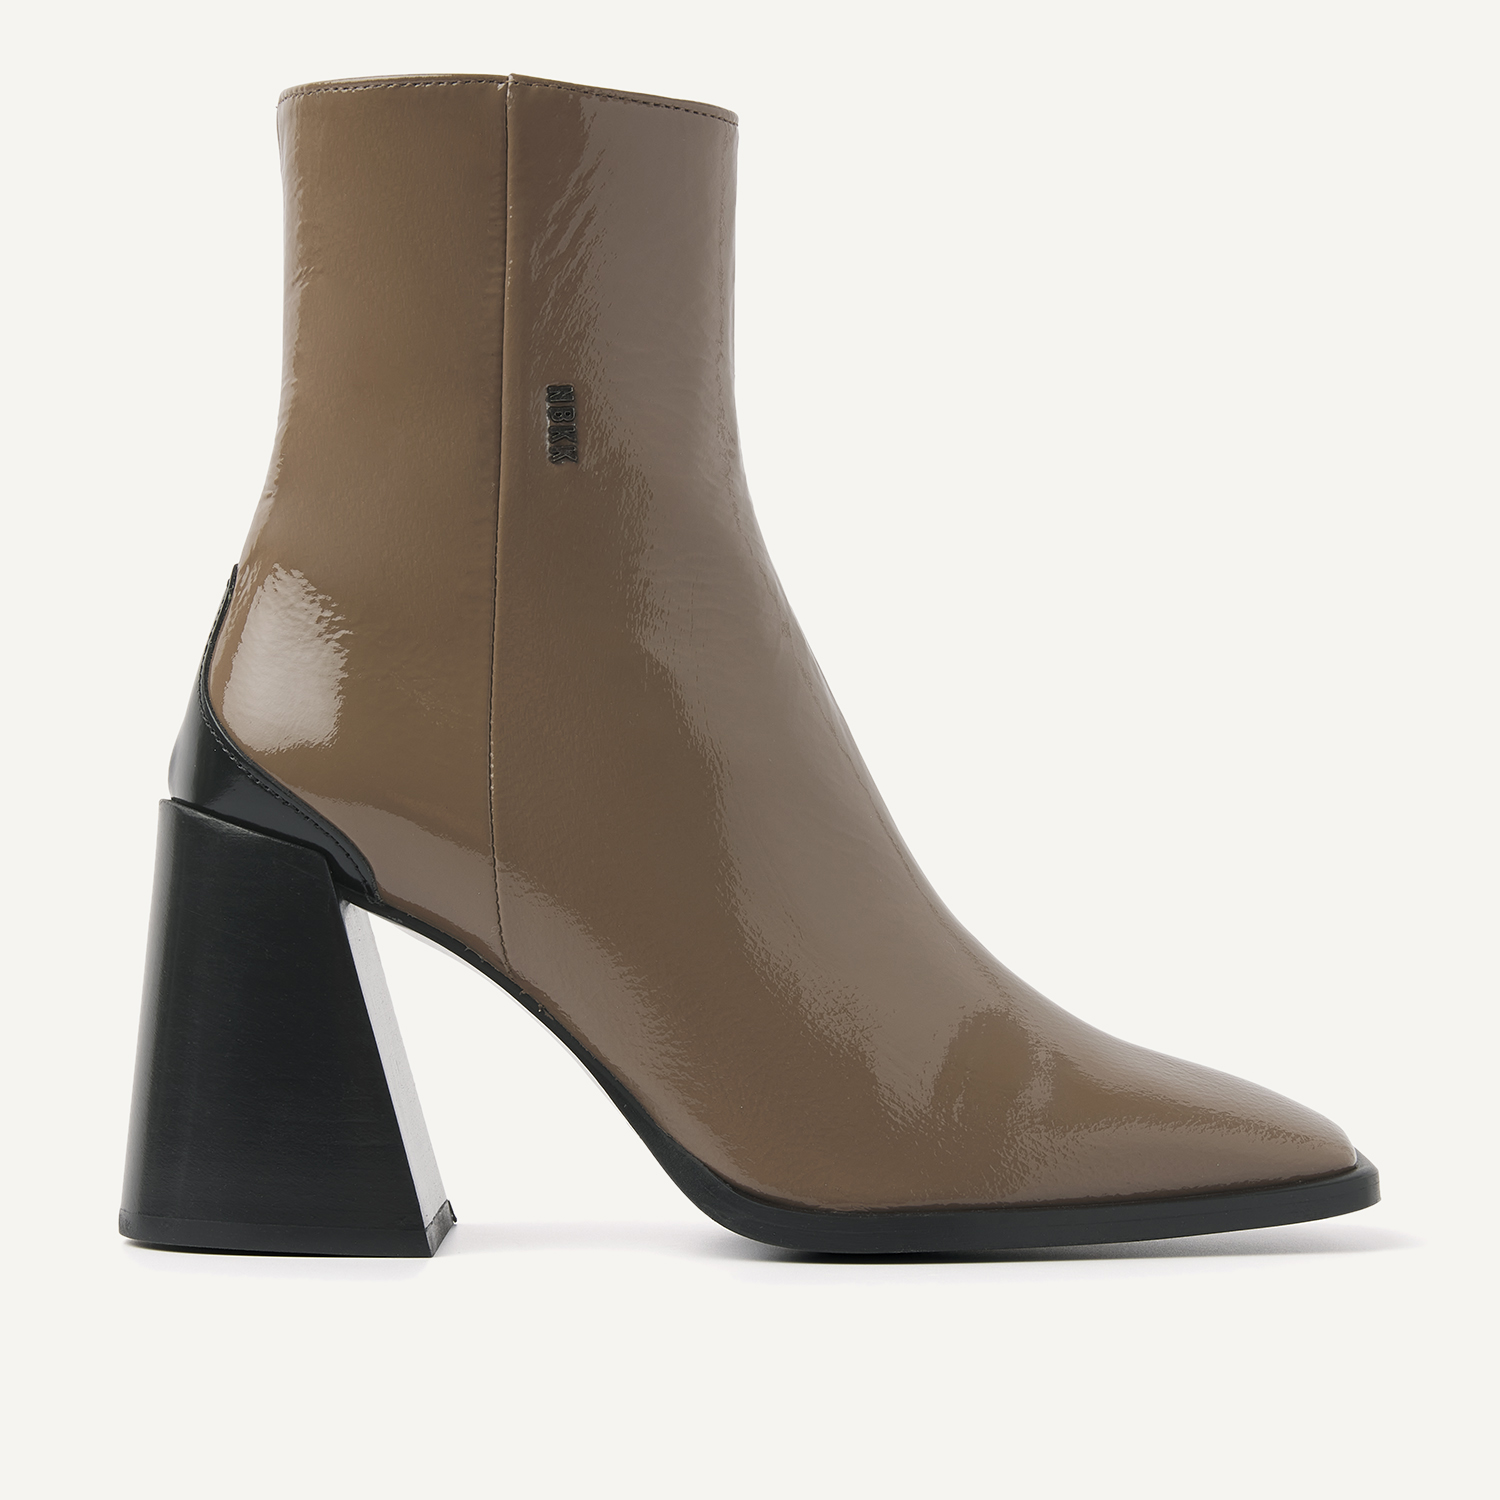 Lana Pilar | Cappuccino Ankle Boots for Women